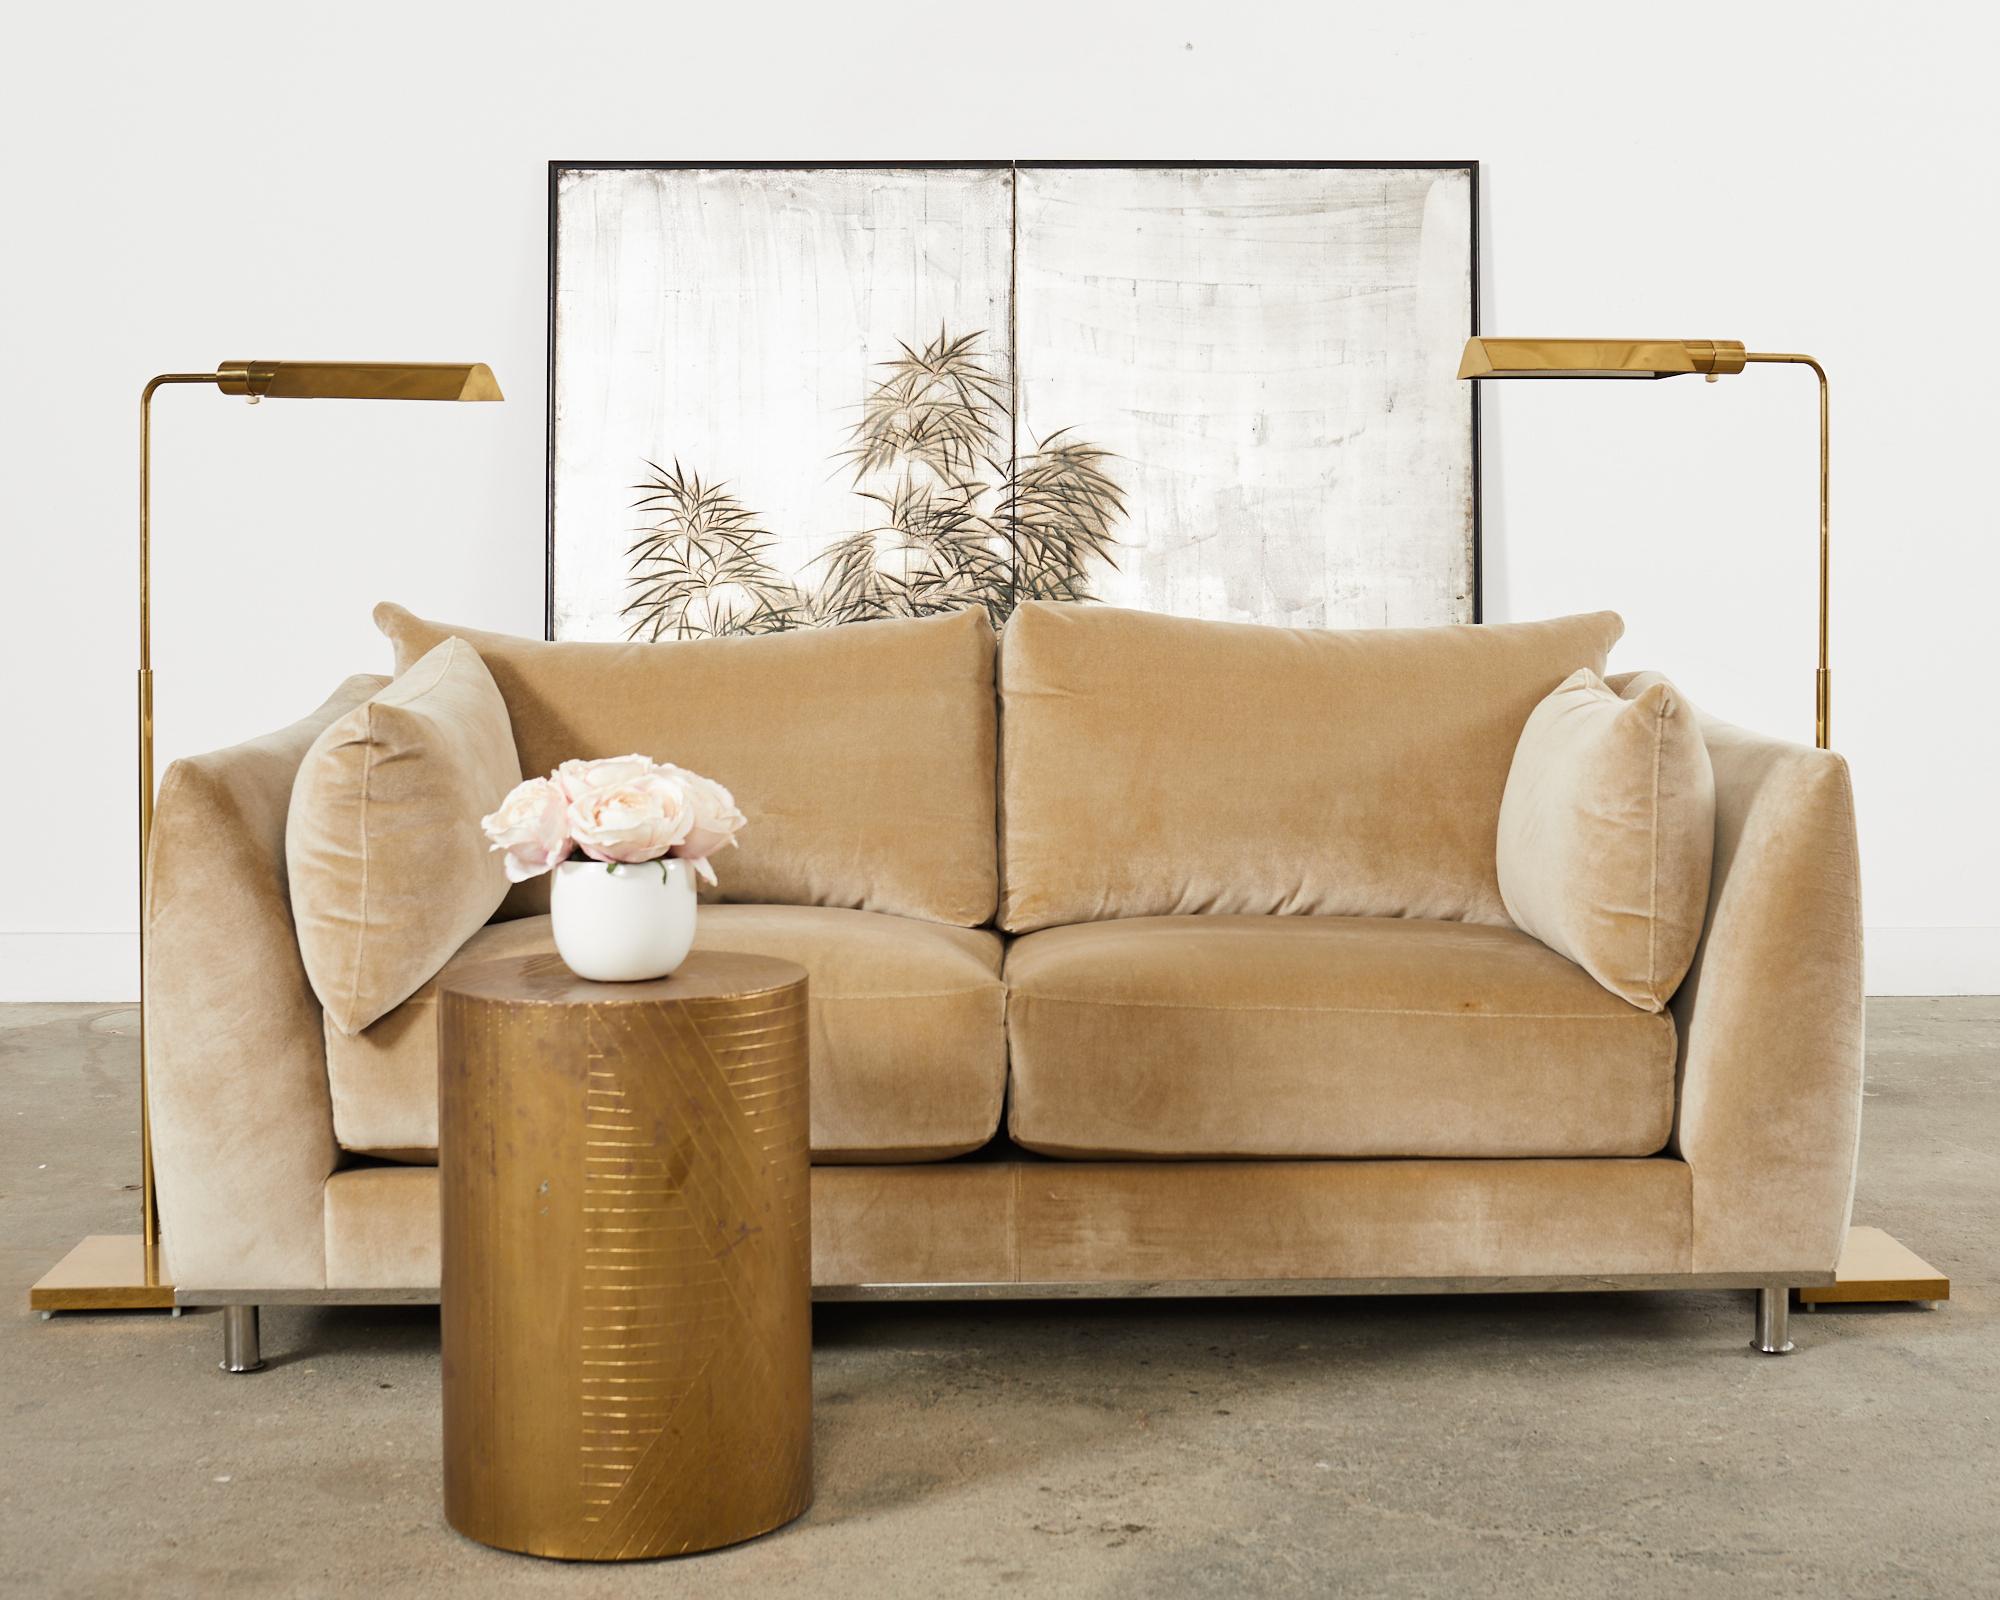 Bespoke camel mohair sofa settee designed by Dakota Jackson. The Iko Downs sofa features a hardwood frame mounted to a polished stainless steel base with tubular legs. Custom ordered in an COM soft mohair upholstery fabric in a stylish camel tone.